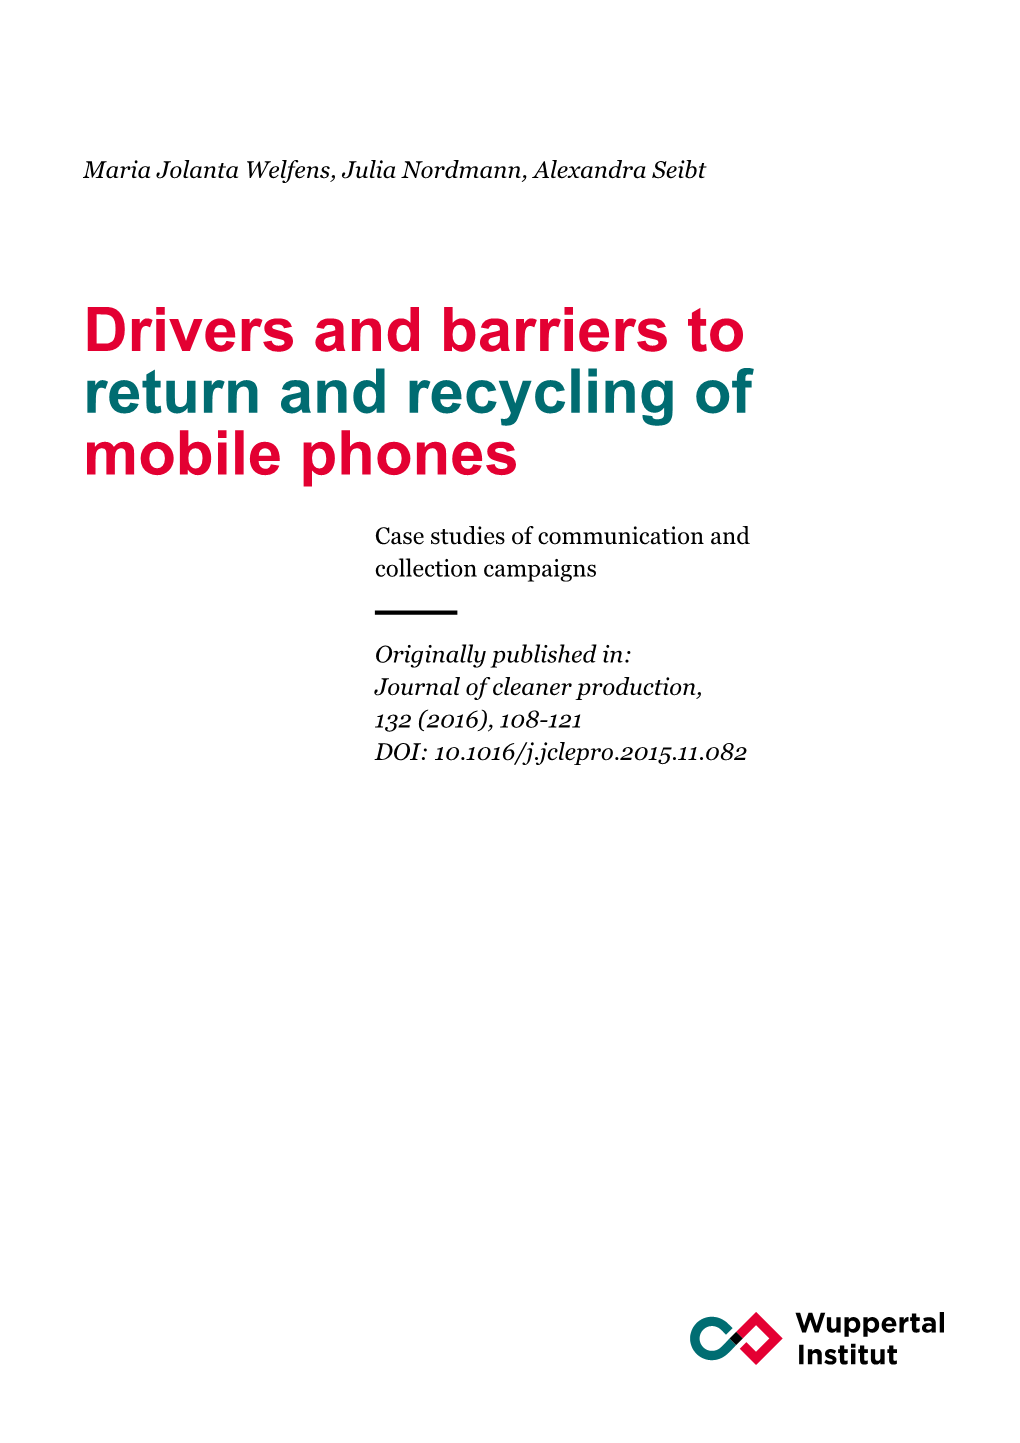 Drivers and Barriers to Return and Recycling of Mobile Phones